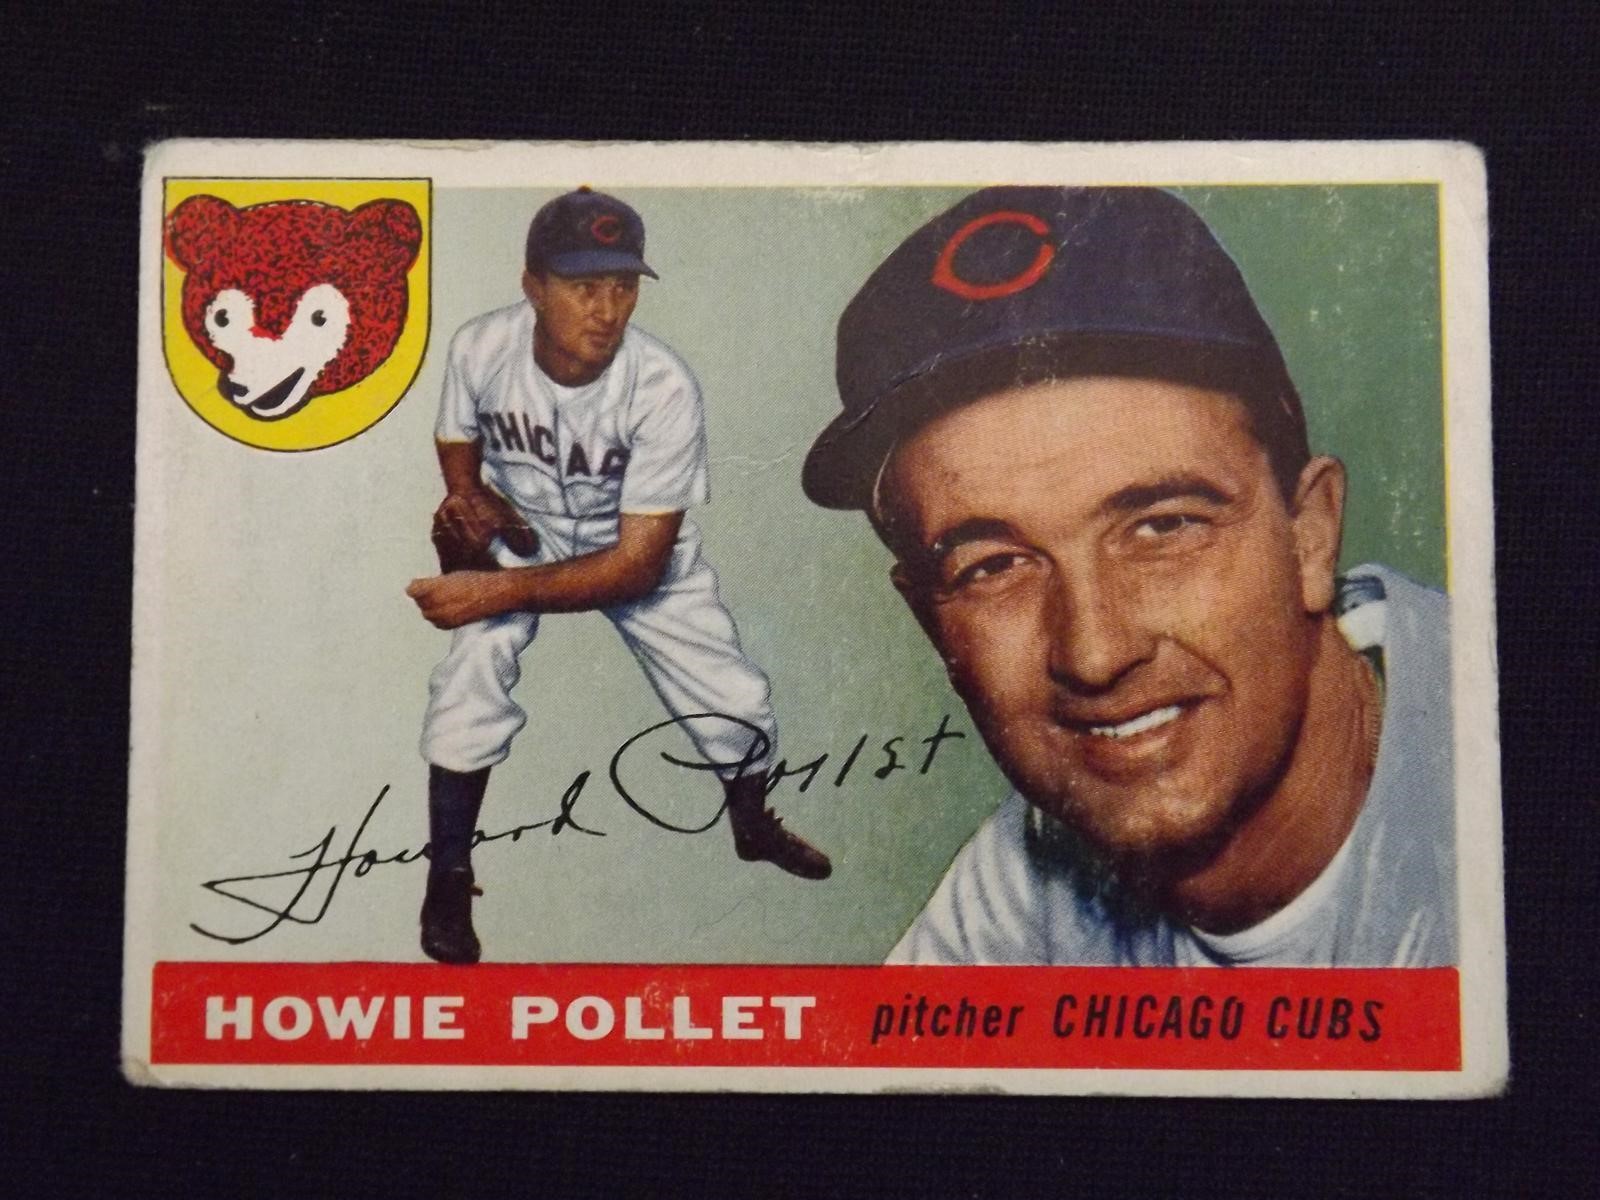 1955 TOPPS #76 HOWIE POLLET CHICAGO CUBS